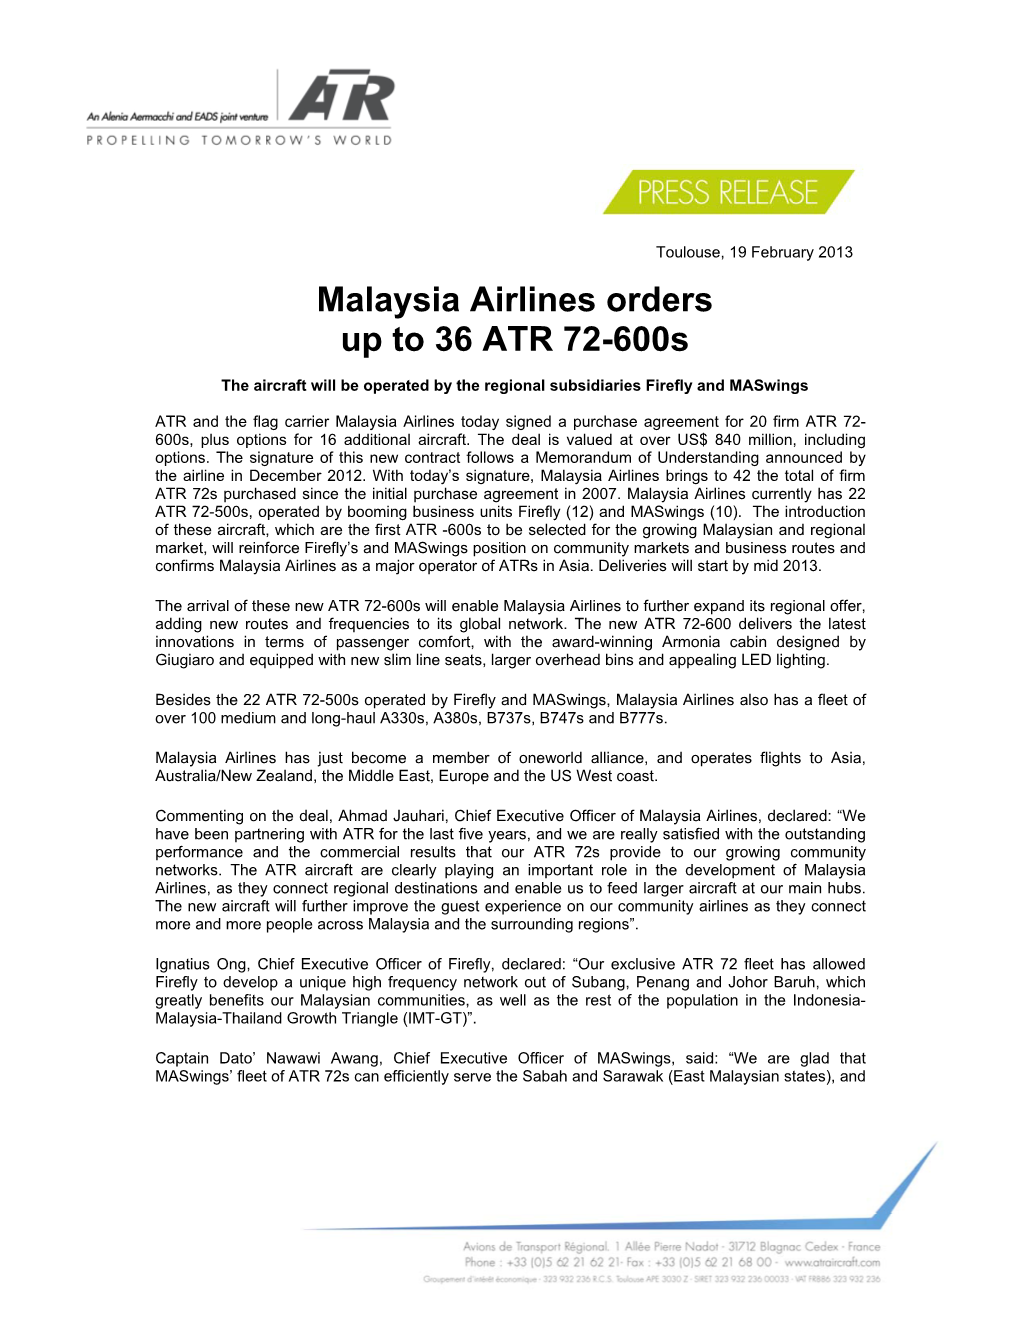 Malaysia Airlines Orders up to 36 ATR 72-600S